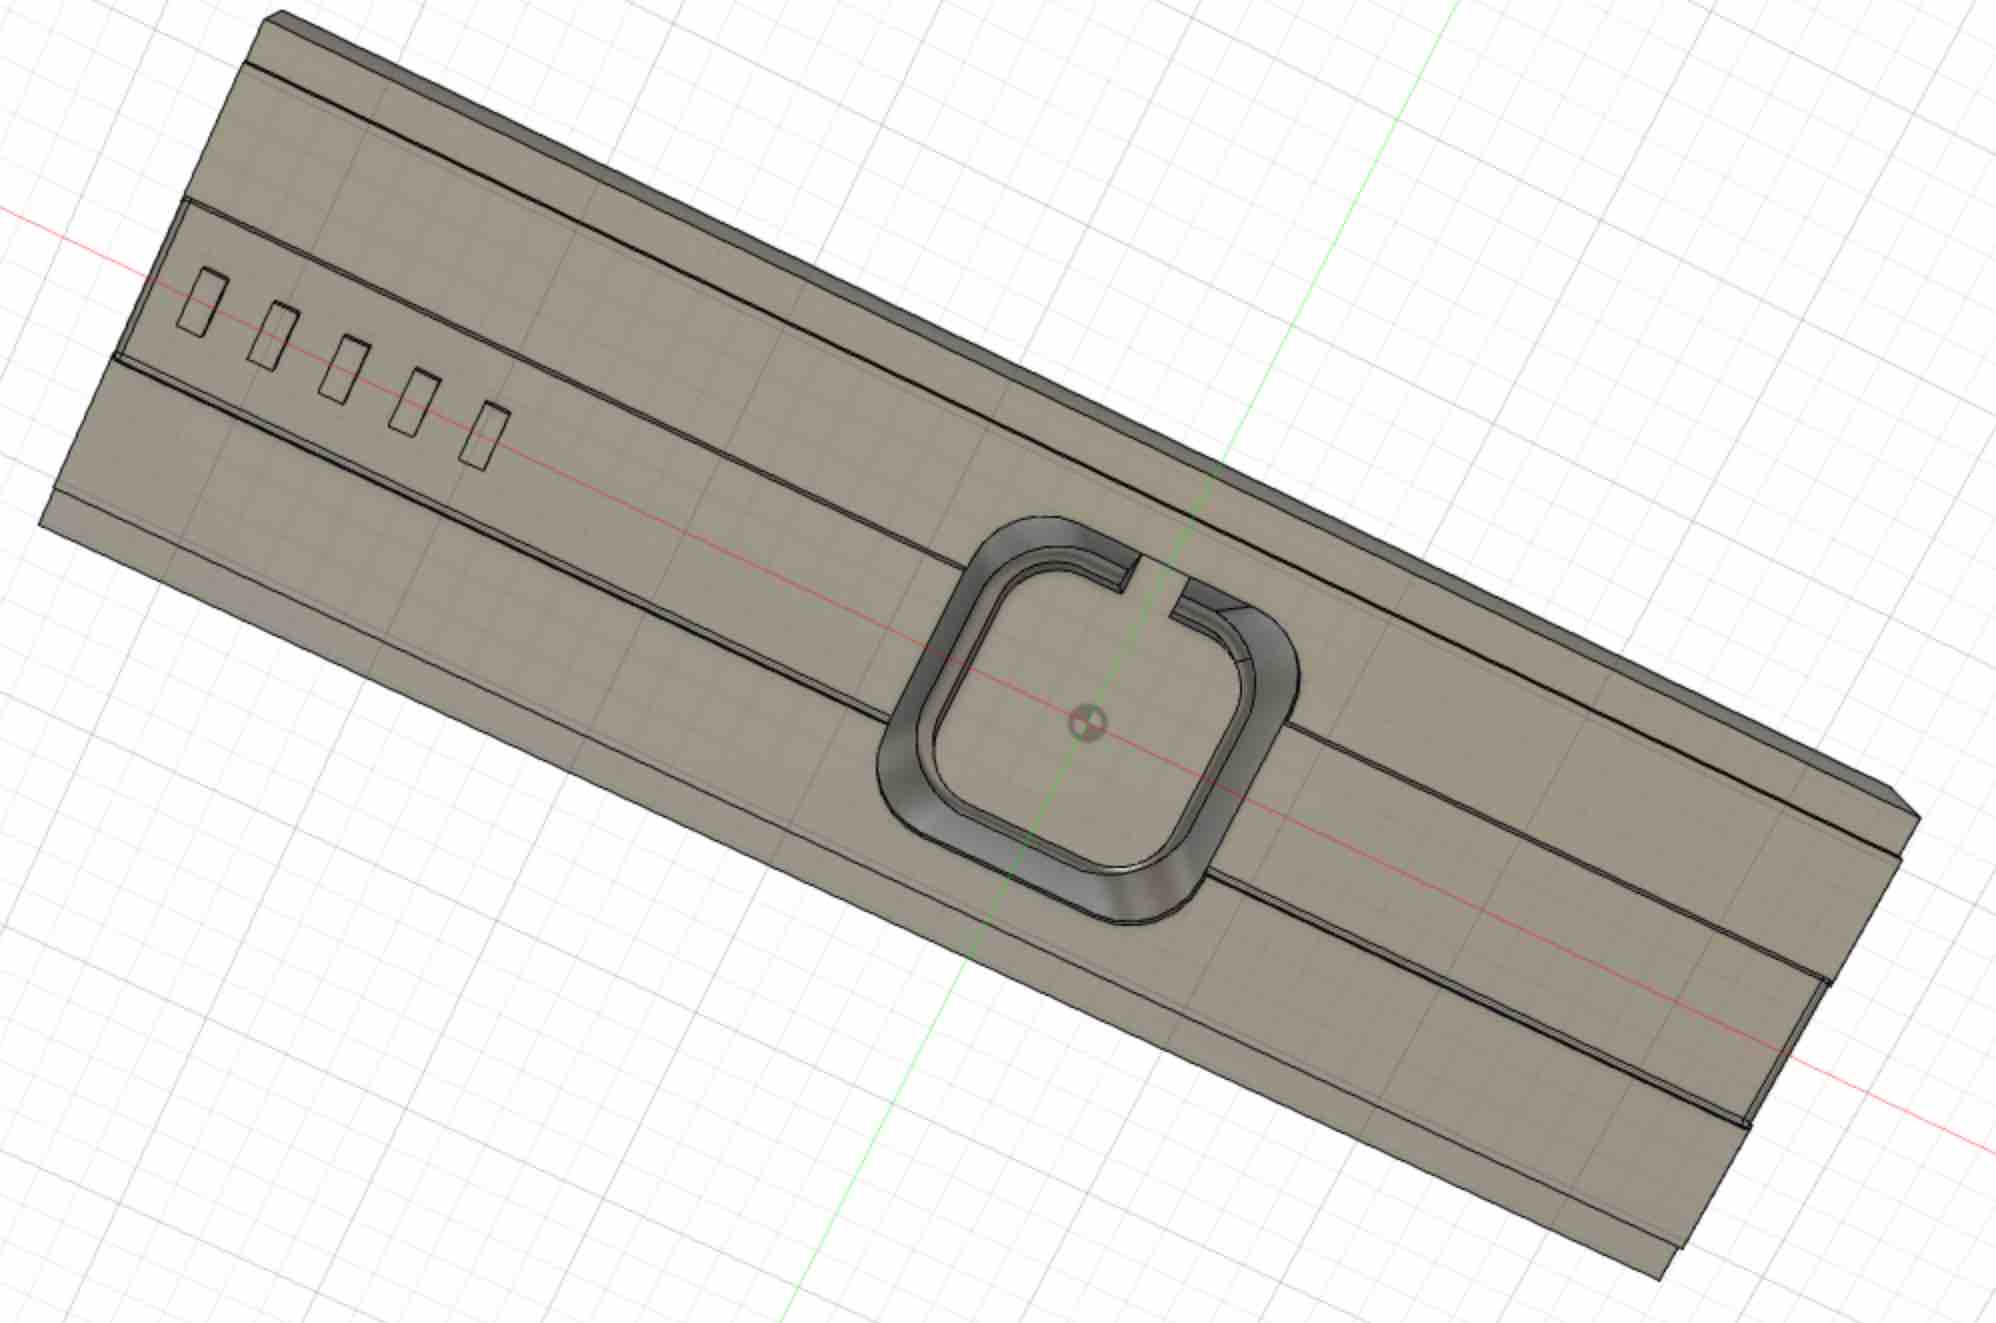 Interface strap for milling and casting.